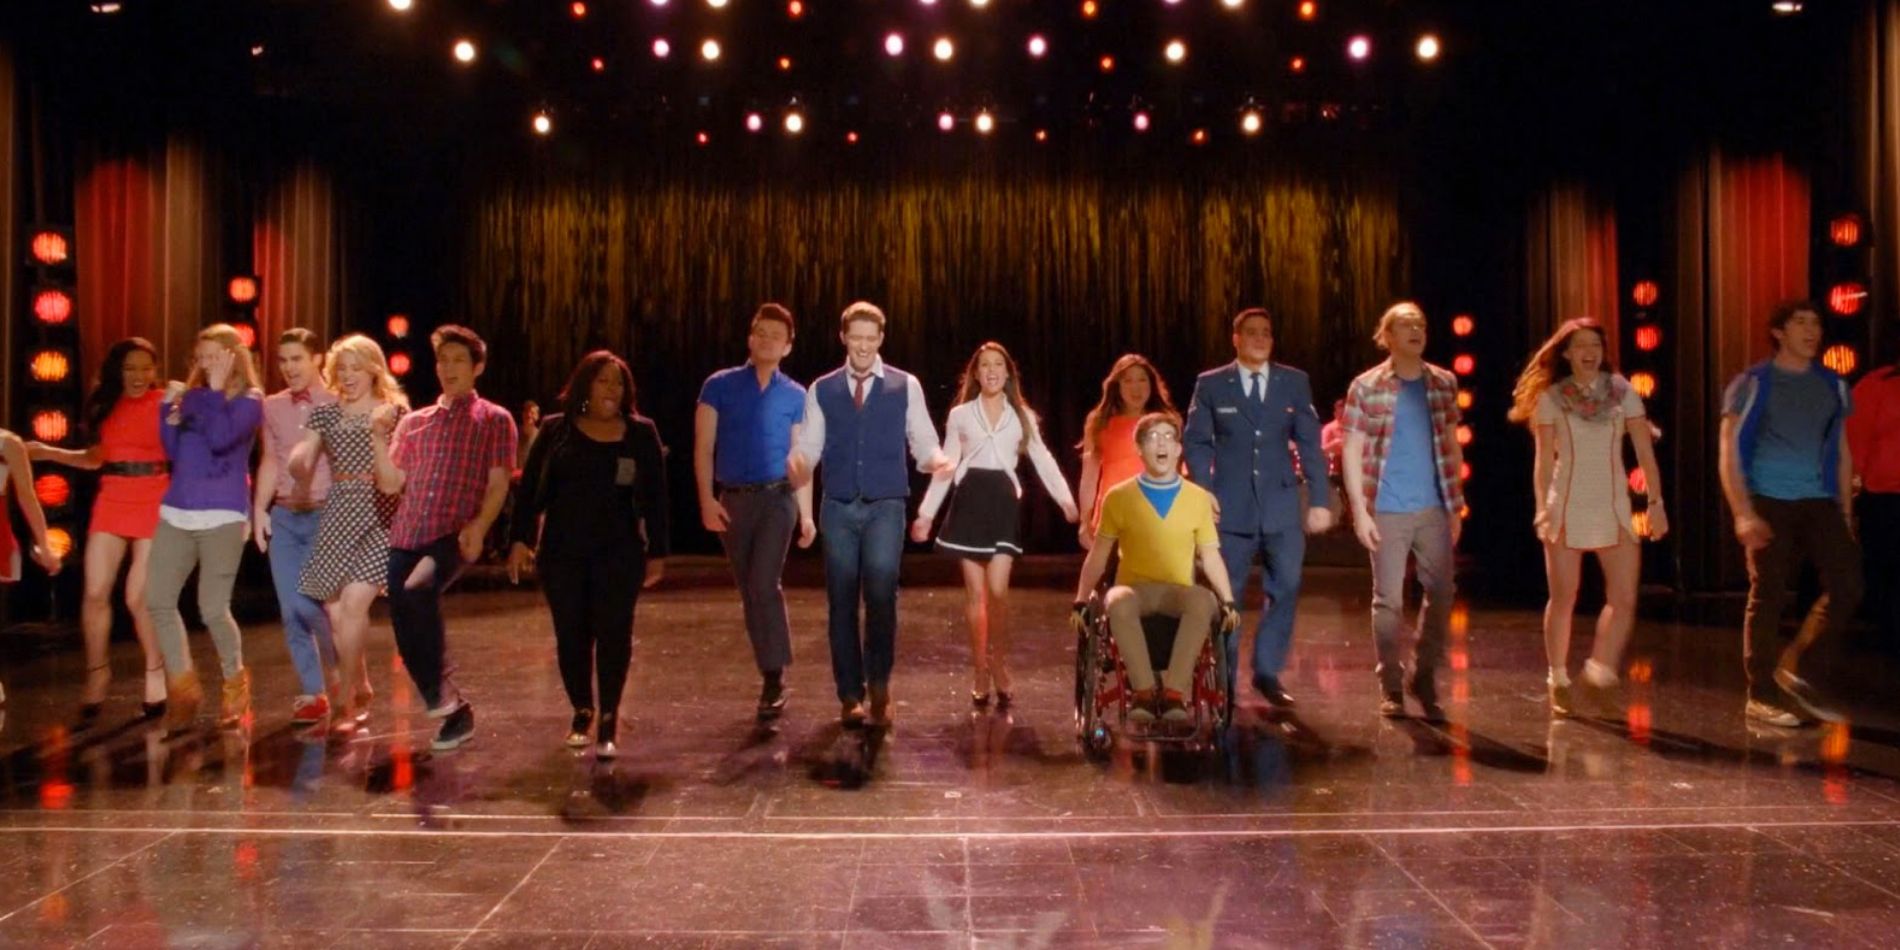 Past and present members of New Directions perform Don't Stop Believing